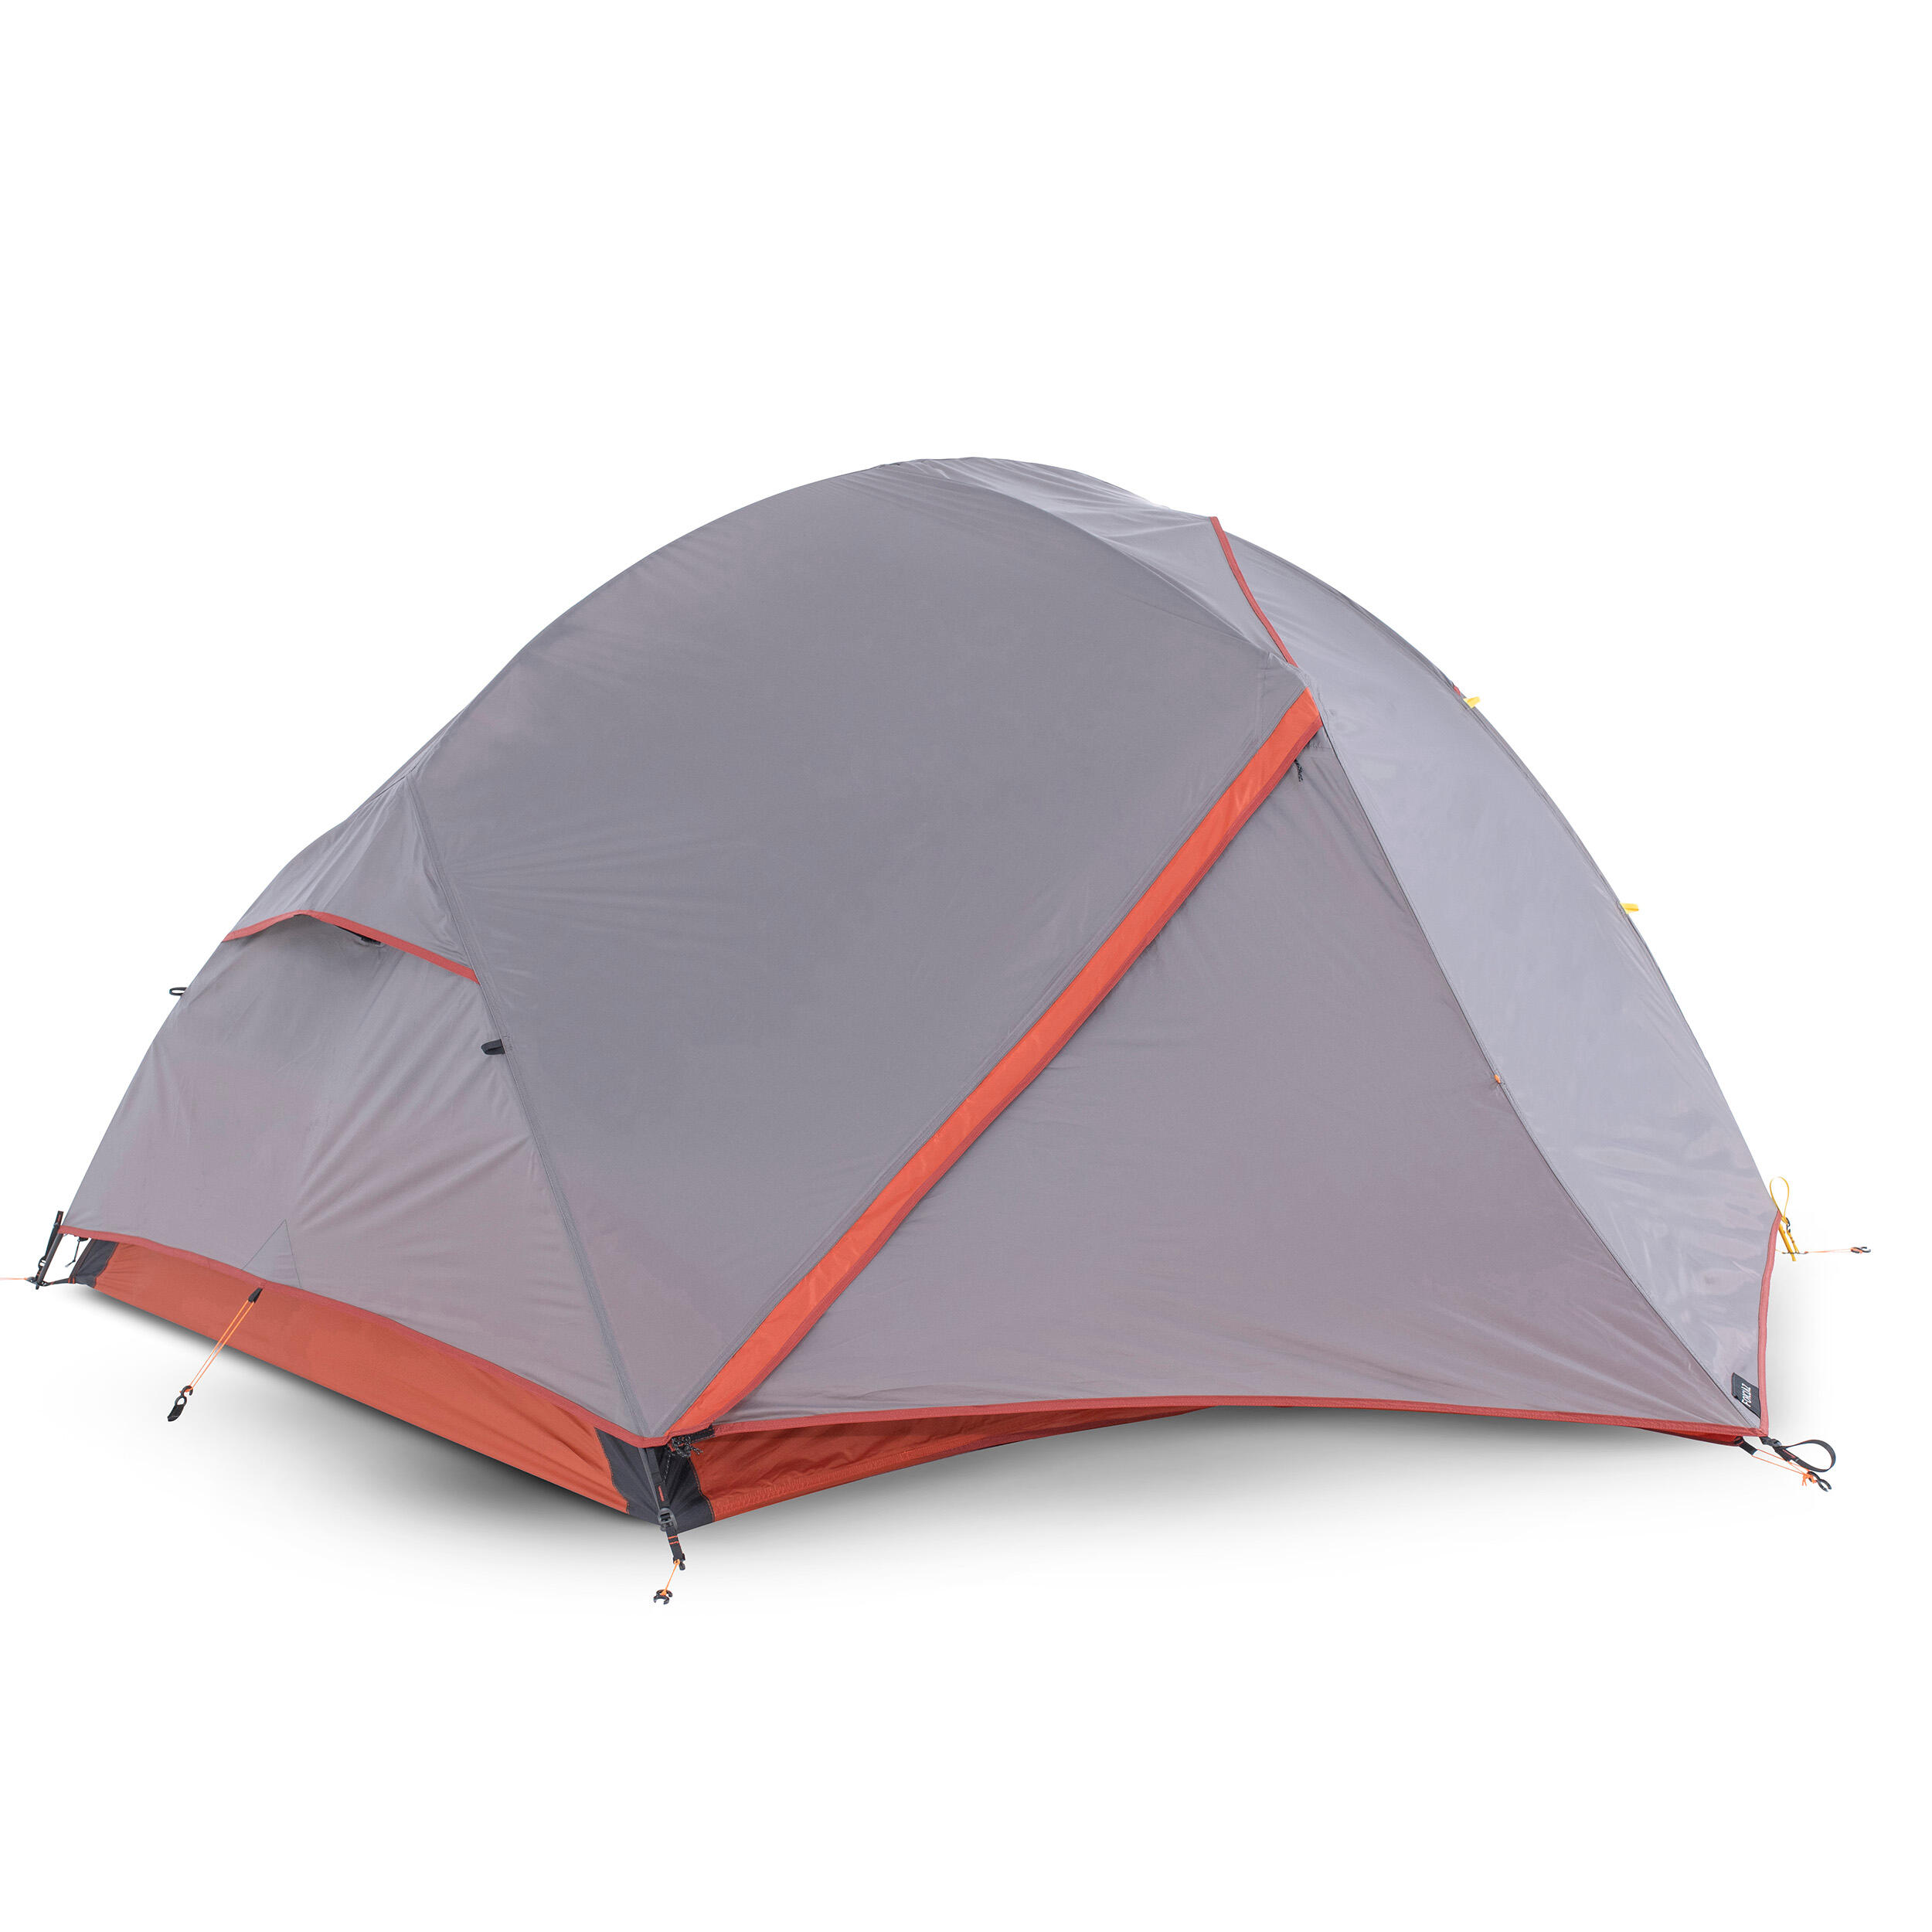 Backpacking Tents | Wild Camping Tents 